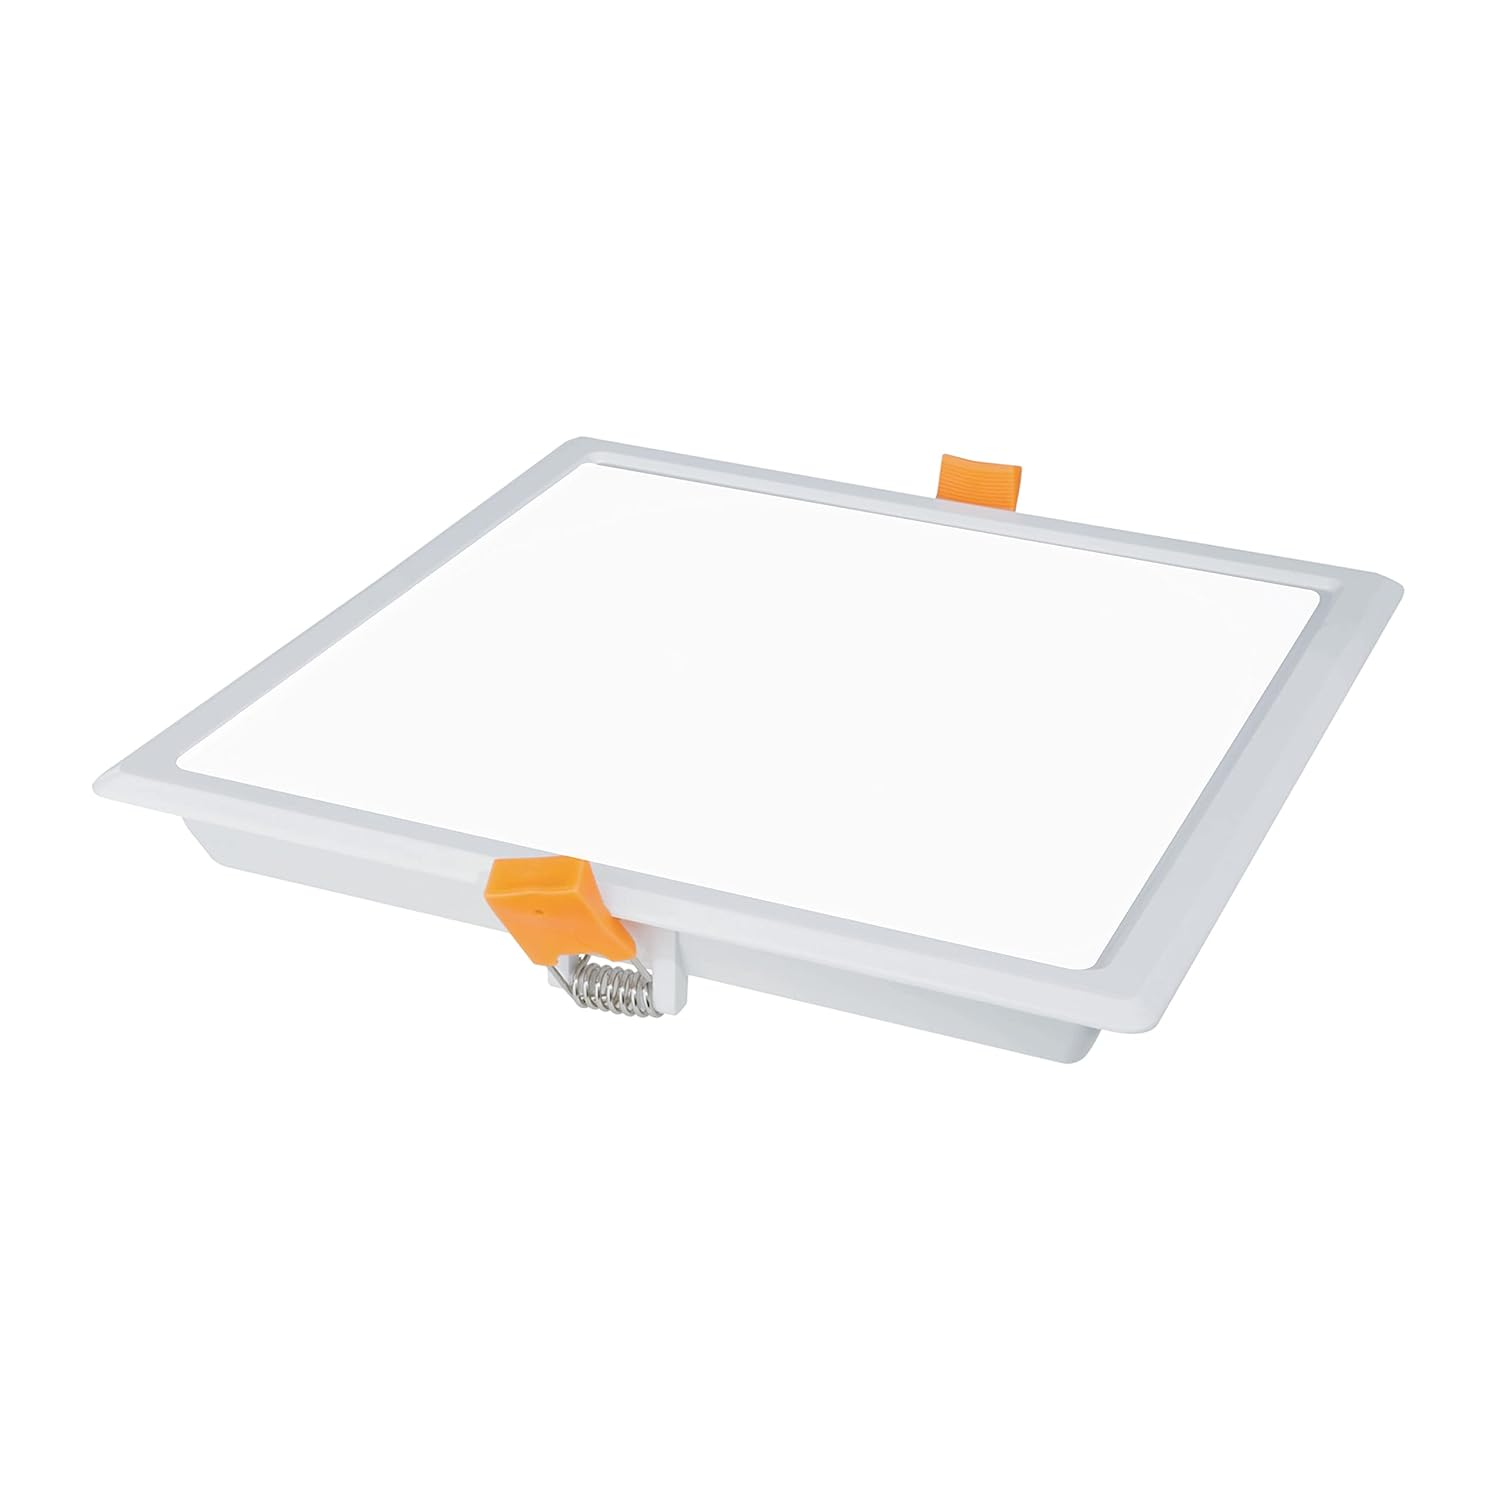 Orient 12W Square 3 in 1 LED Panel Light  (ColorCool White,Warm White-,Natural White)